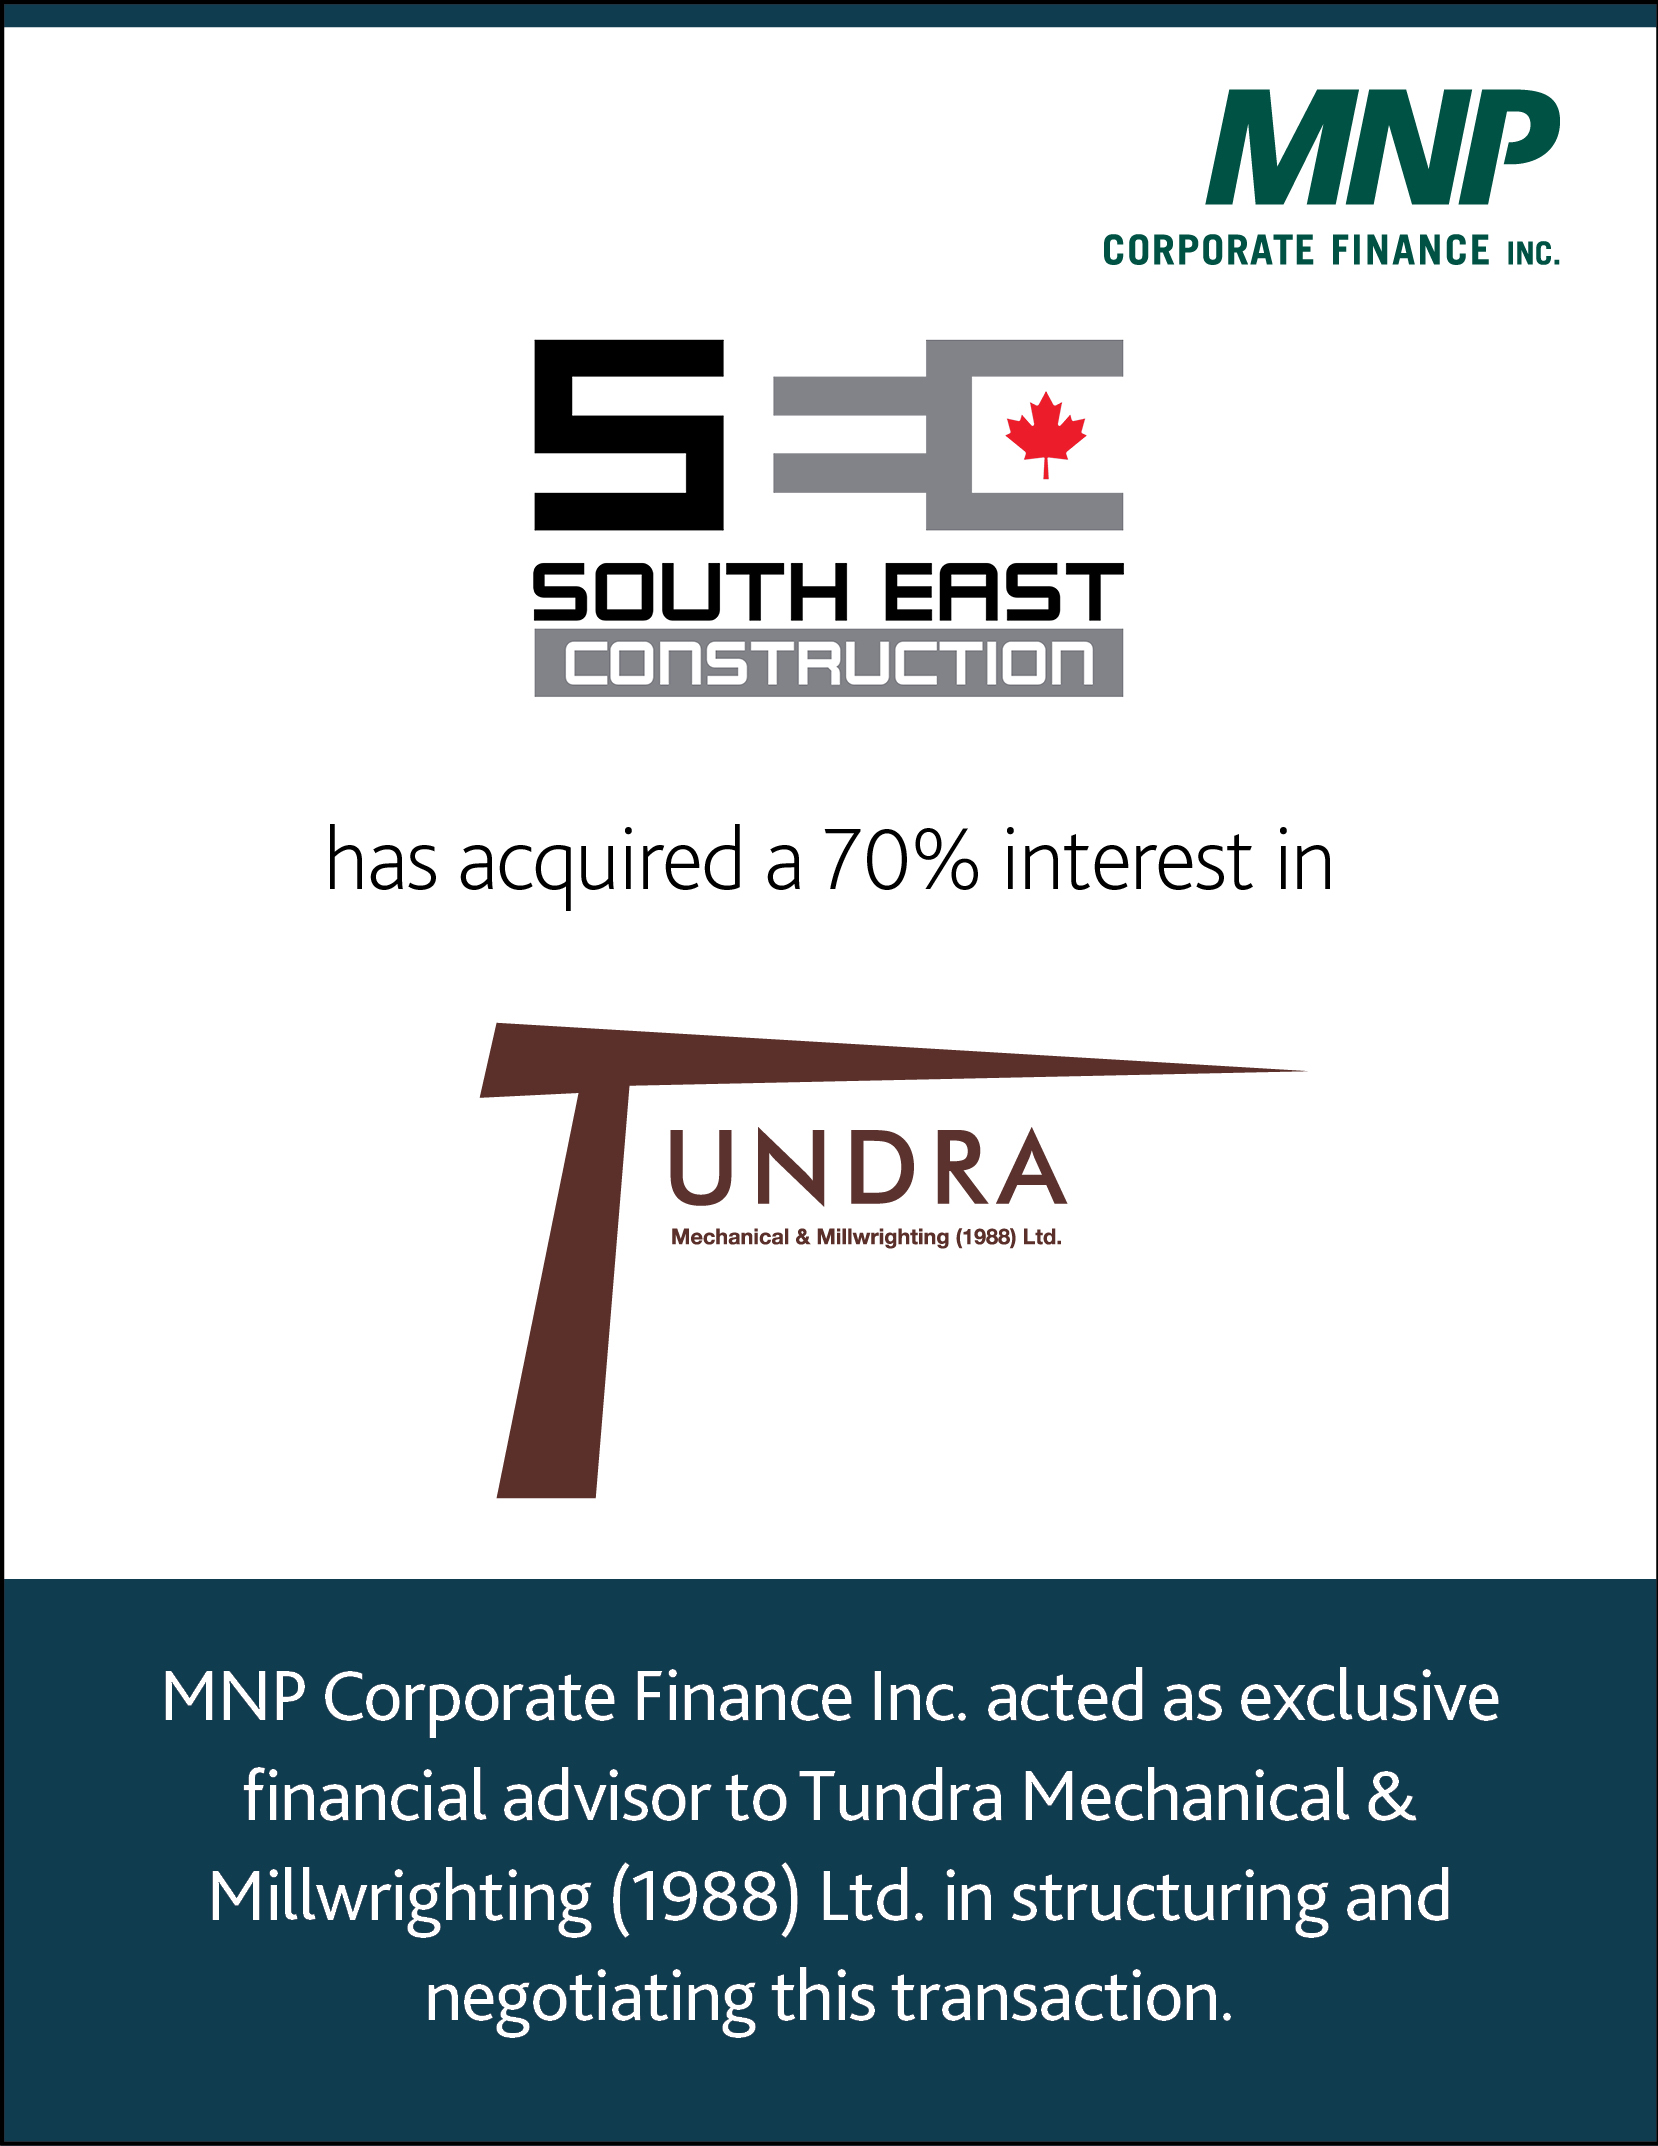 Secon Holdings LP (operating as South East Construction; a subsidiary of Mosaic Capital Corporation) has acquired a 70% interest in Tundra Mechanical & Millwrighting (1988) Ltd.